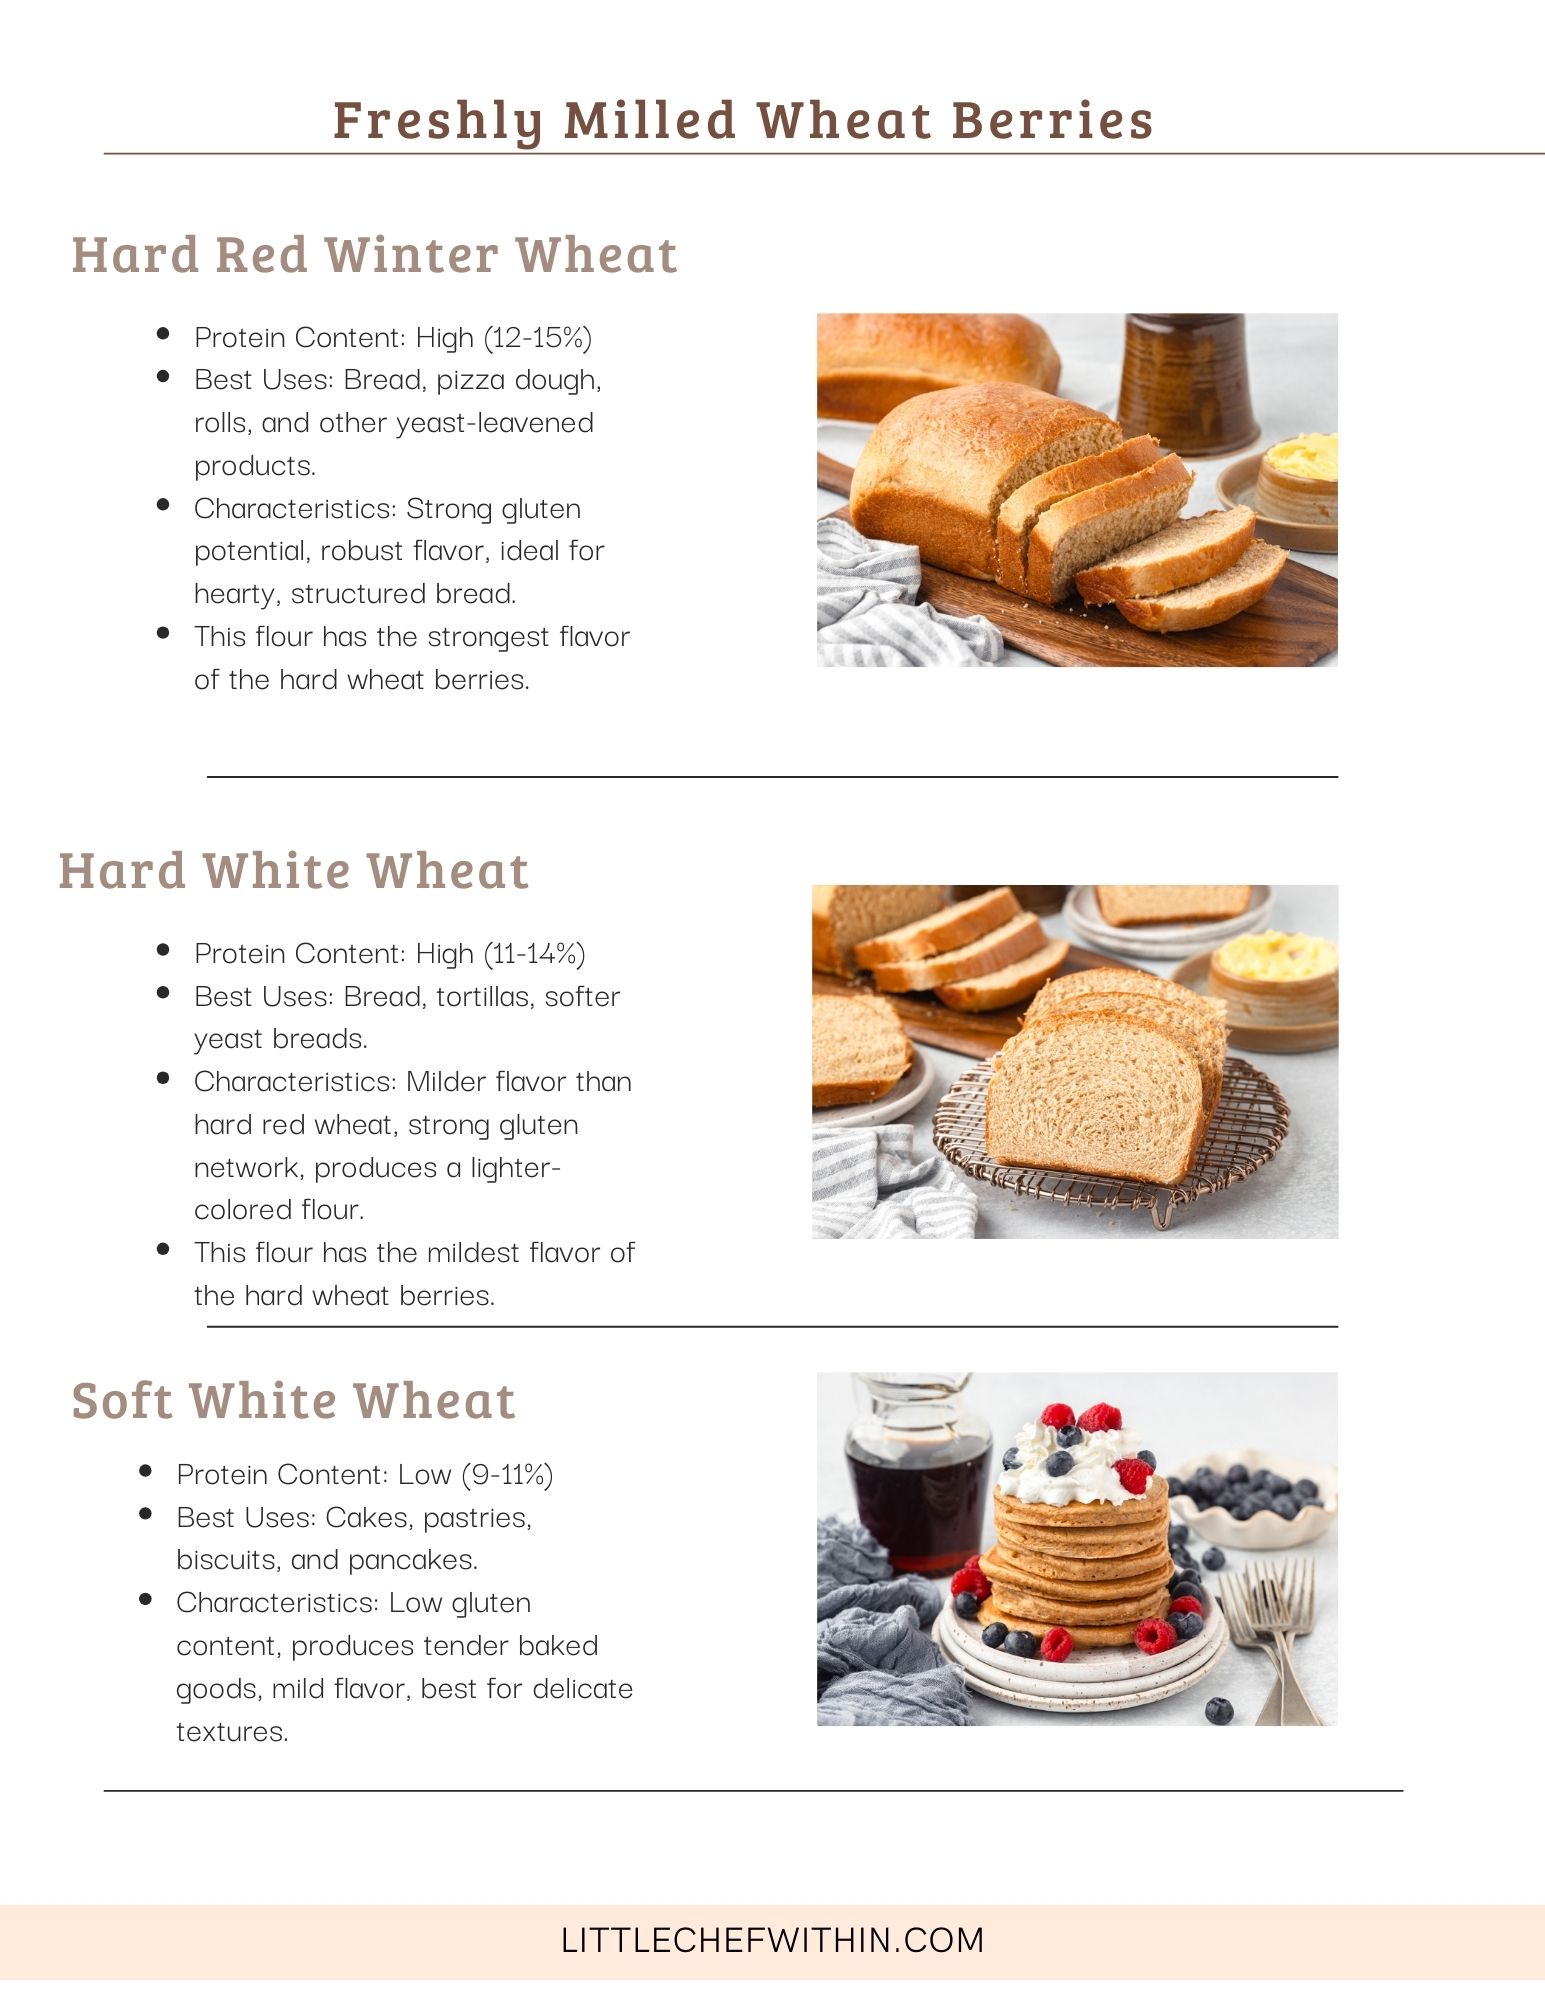 Freshly Milled Info guide detailing the different hard and soft wheat berries.